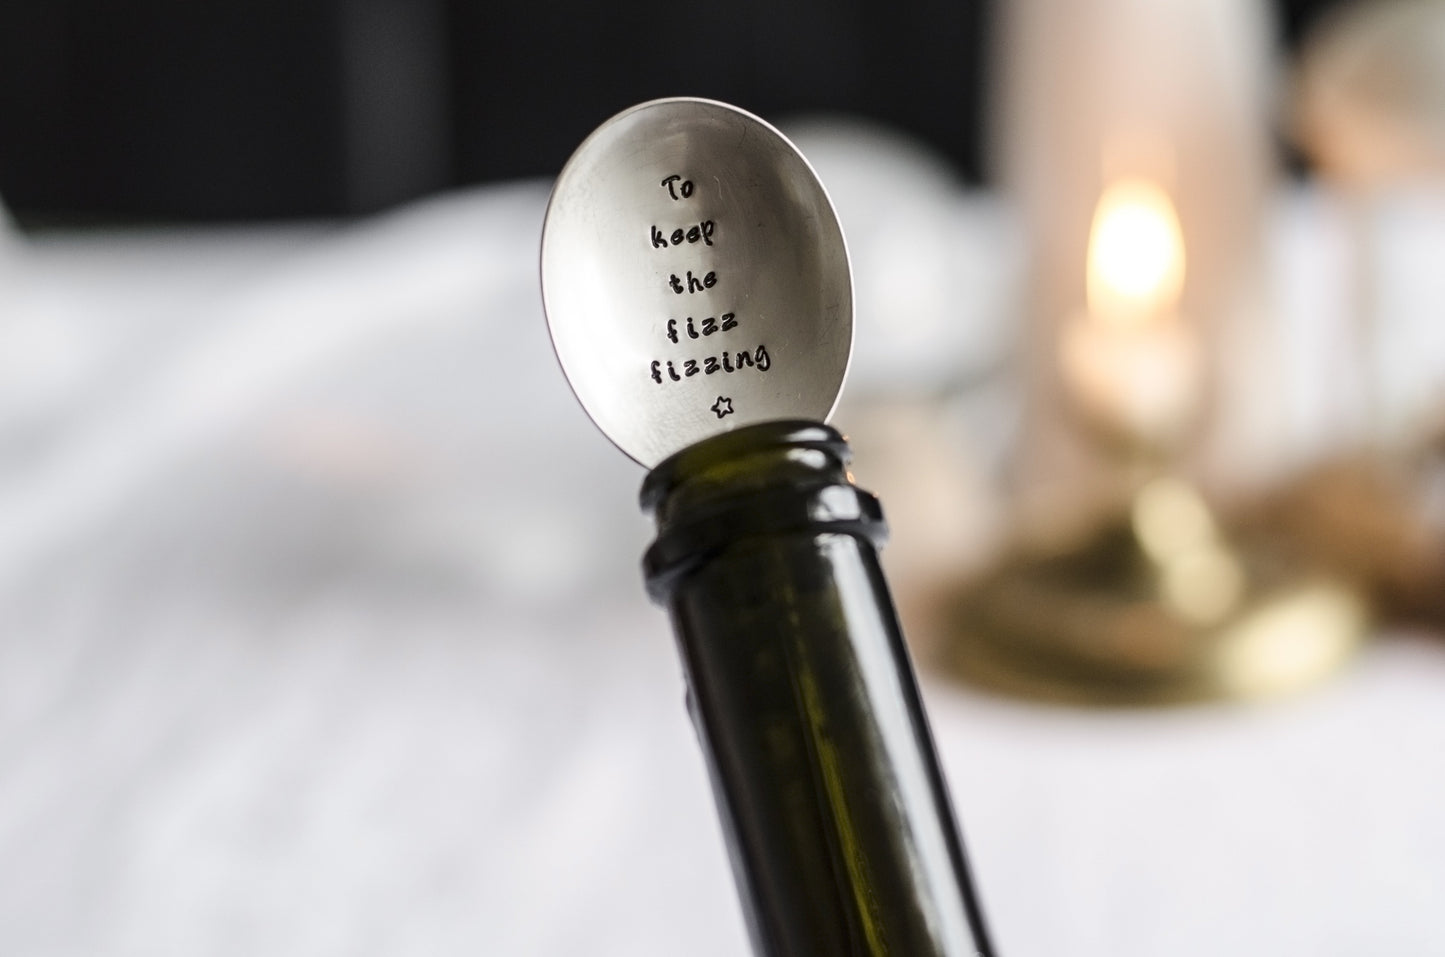 To Keep The Fizz Fizzing - Prosecco and Champagne Bottle Stopper Spoon - One Mama One Shed